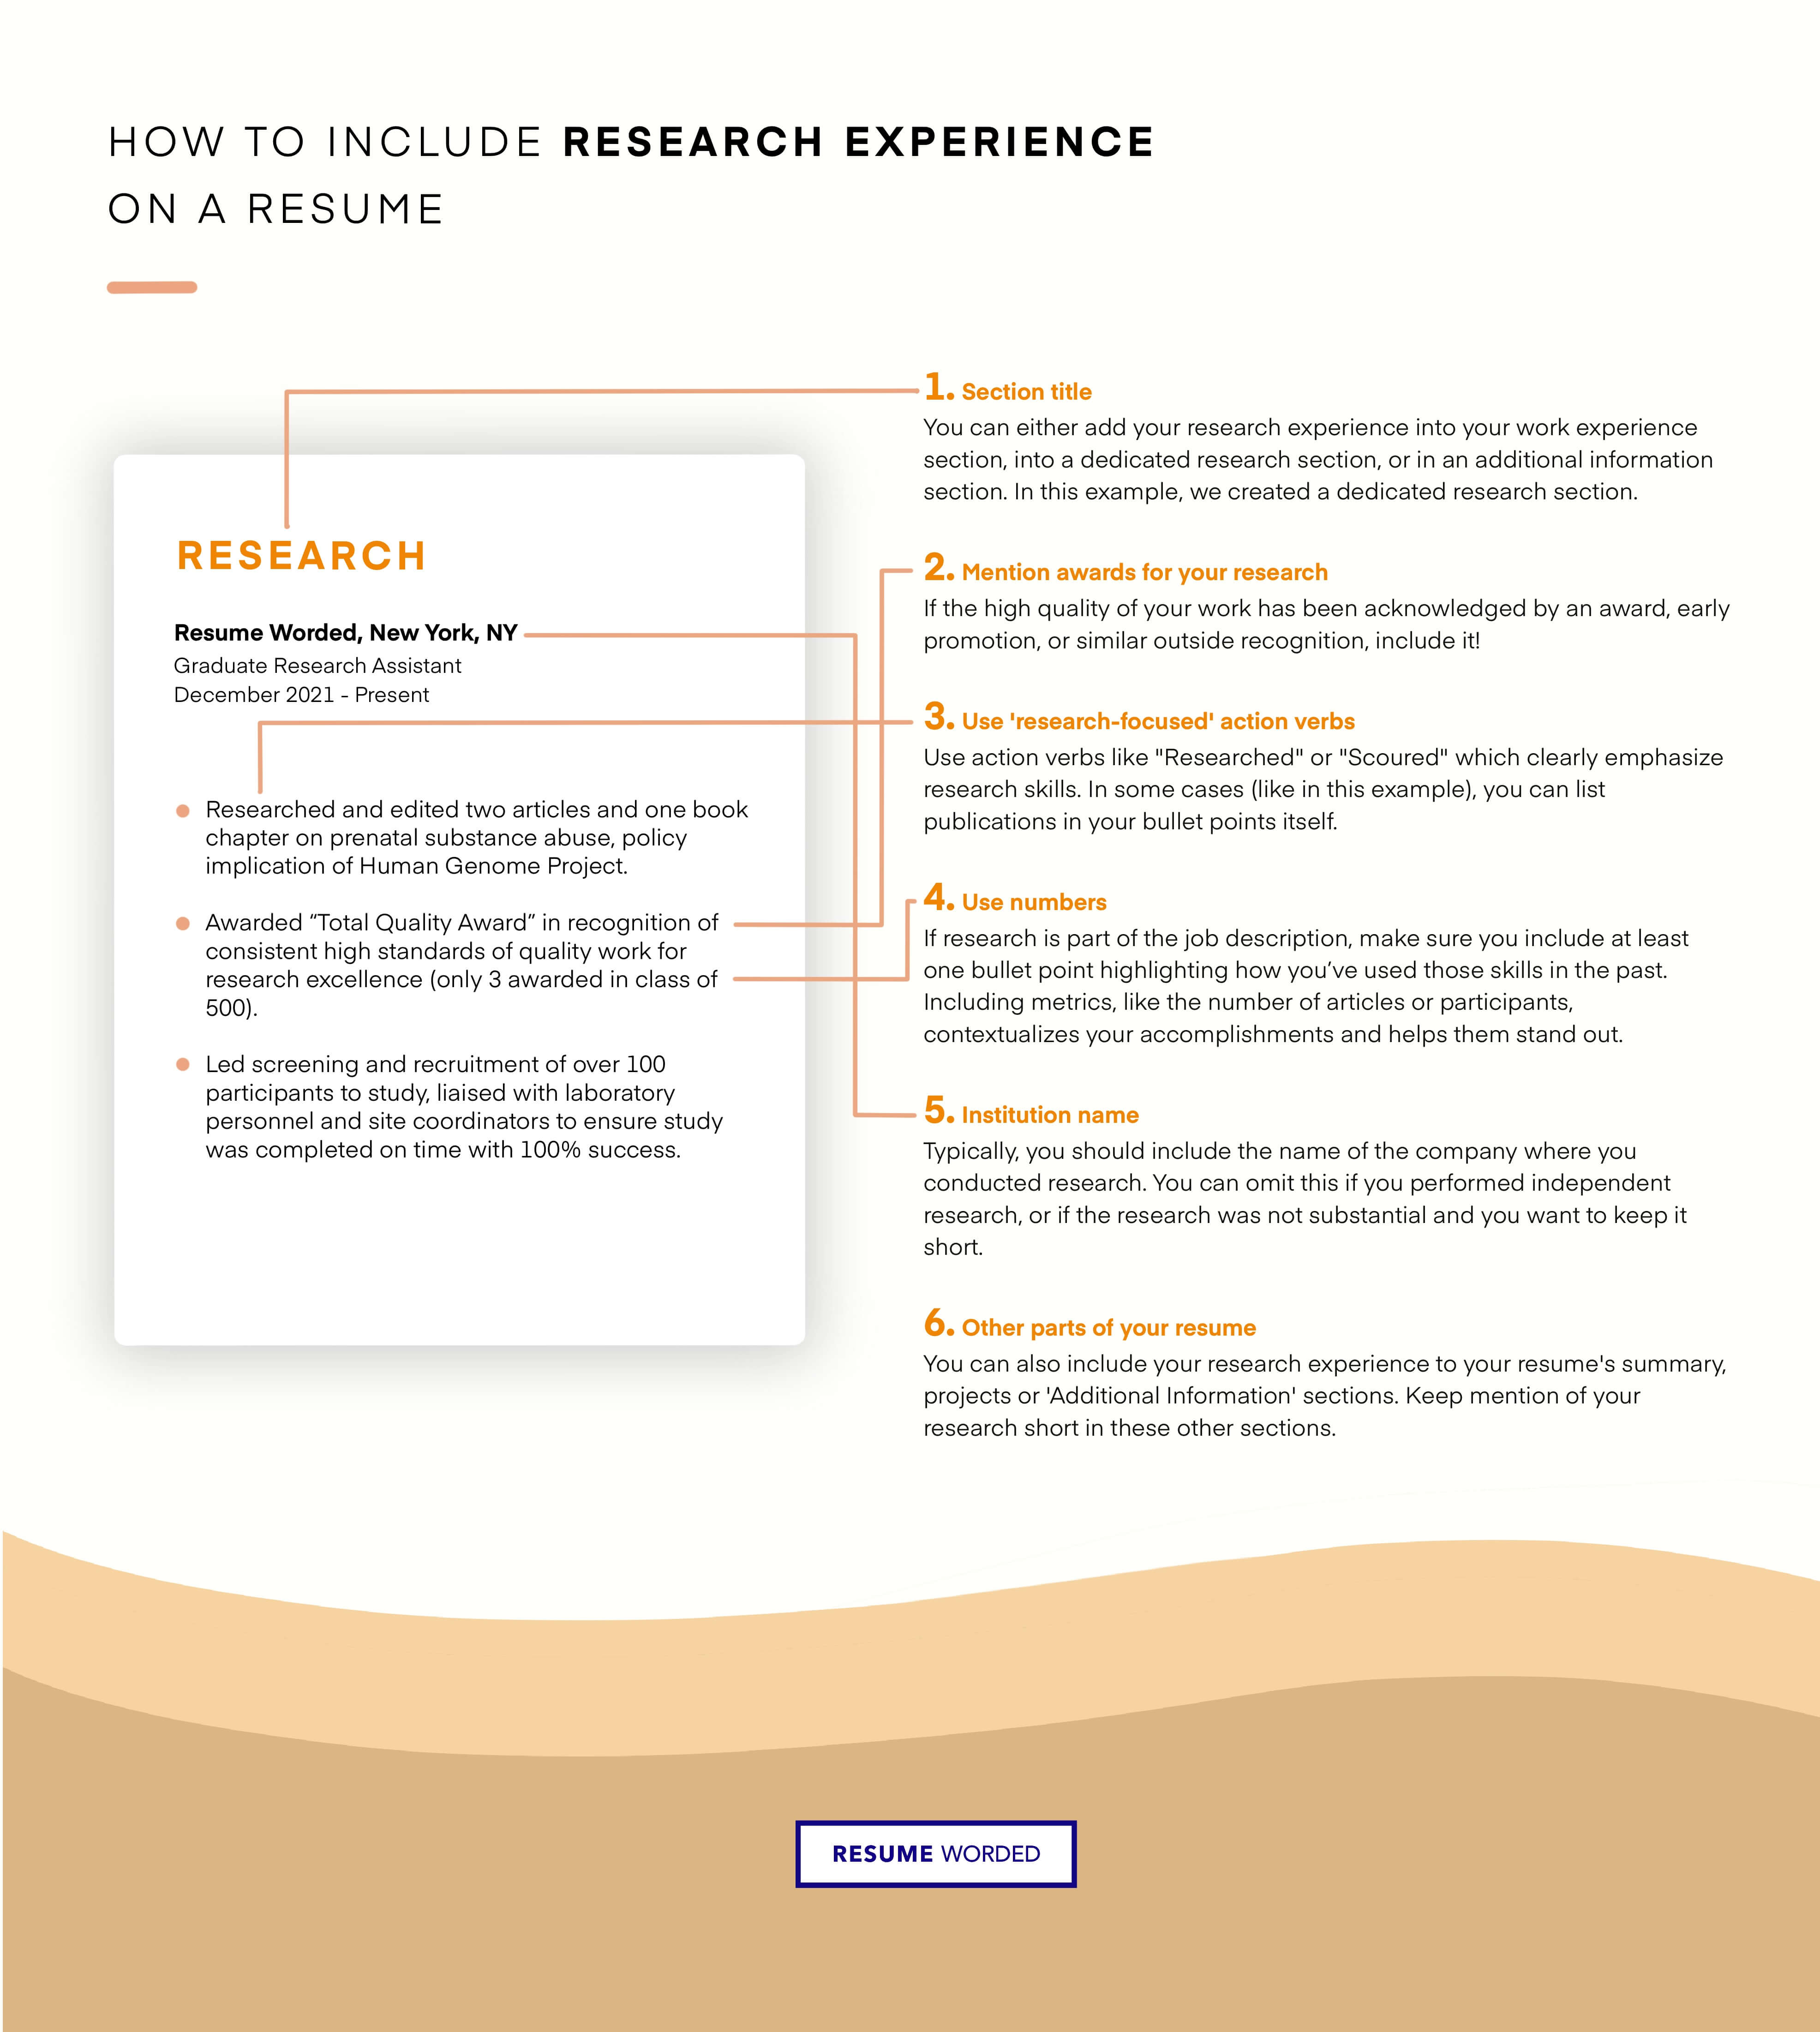 Include student research experience. - Research Coordinator Resume